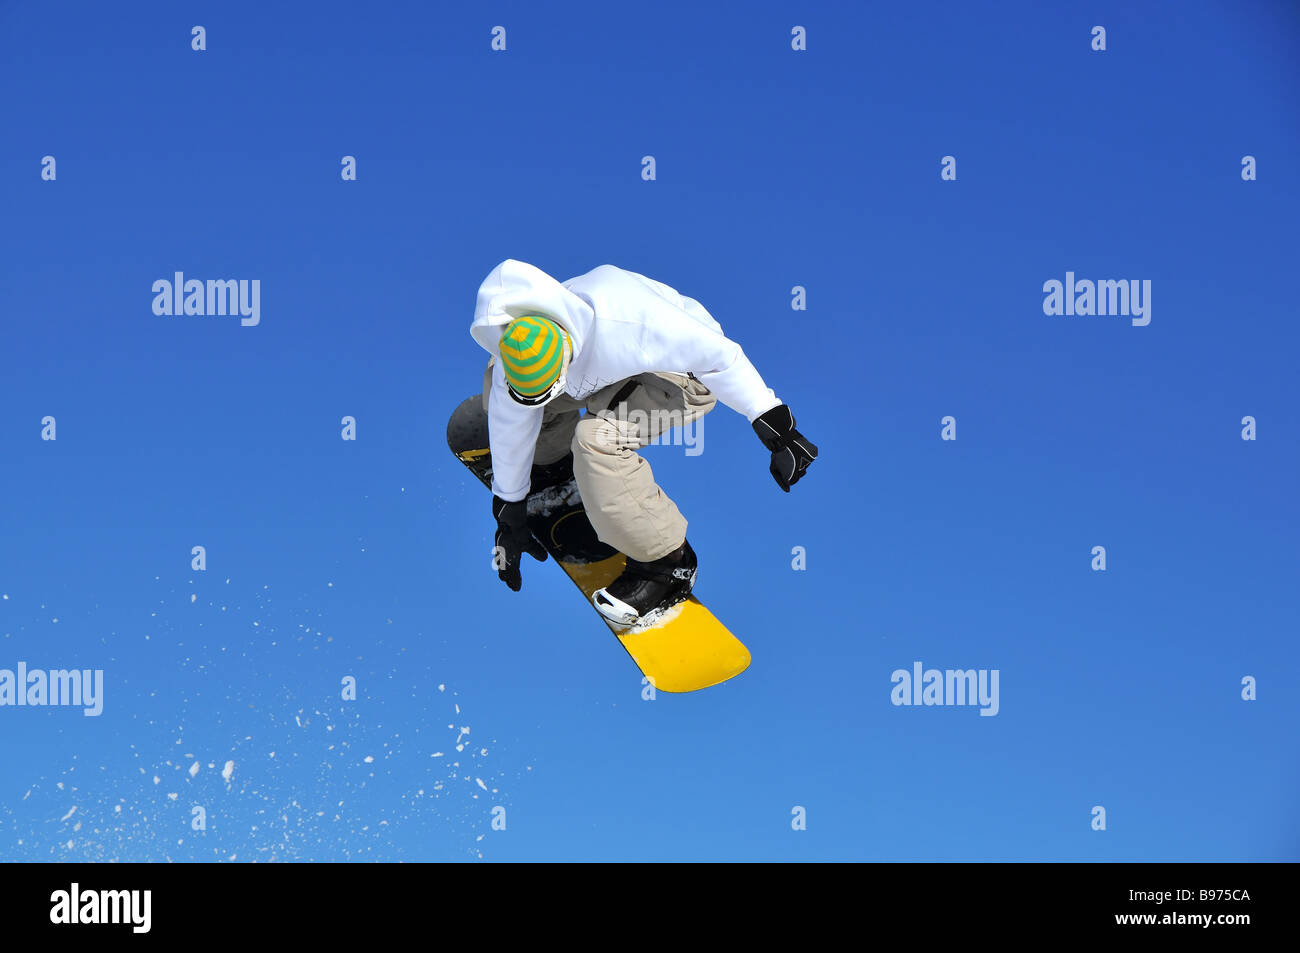 a snowboarder performing a jump Stock Photo